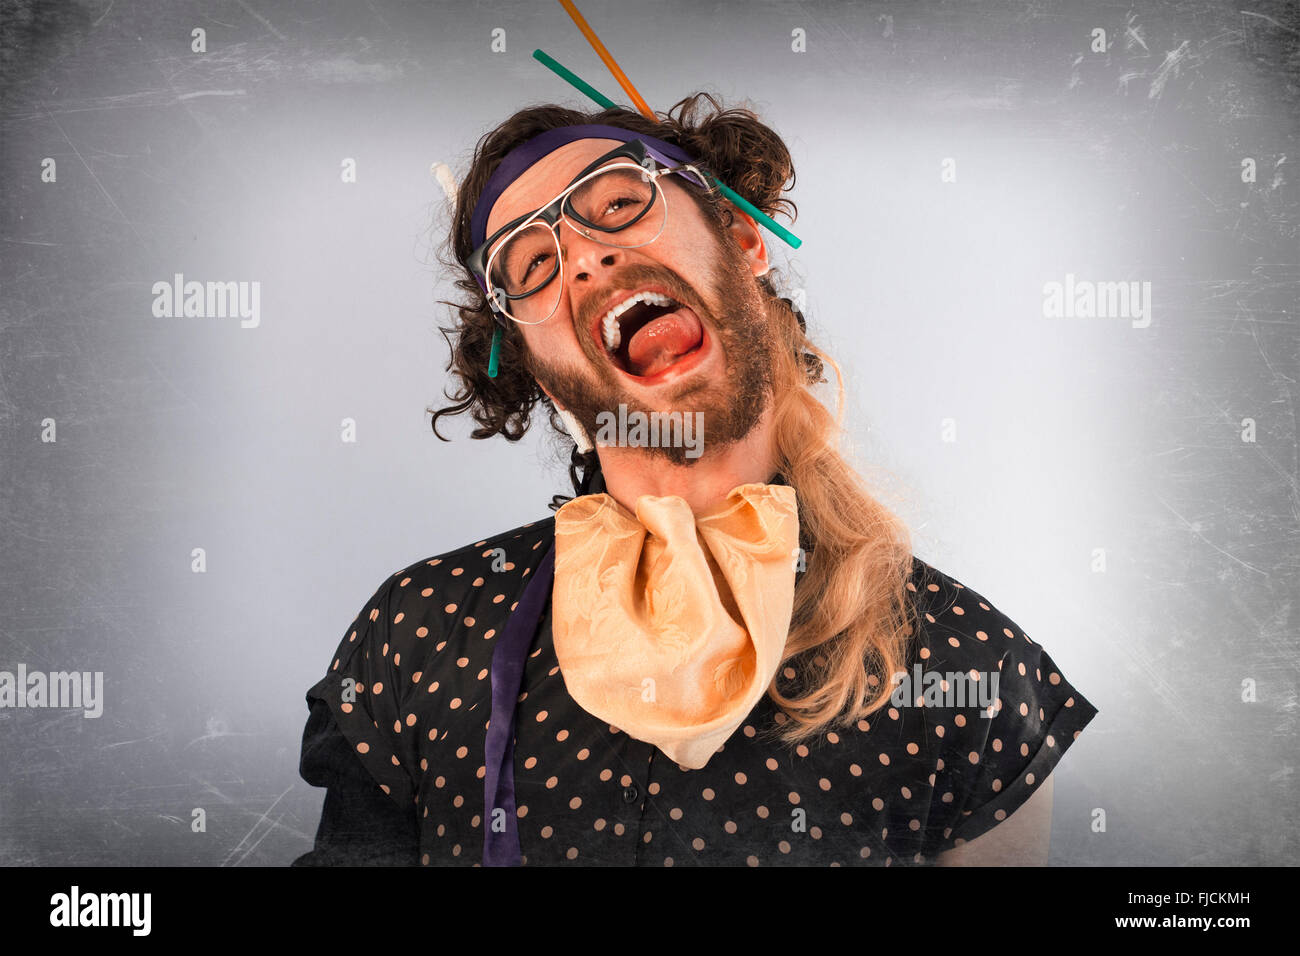 Bearded Crazy Person Lunatic Wearing Several Pairs Of Glasses Stock Photo Alamy